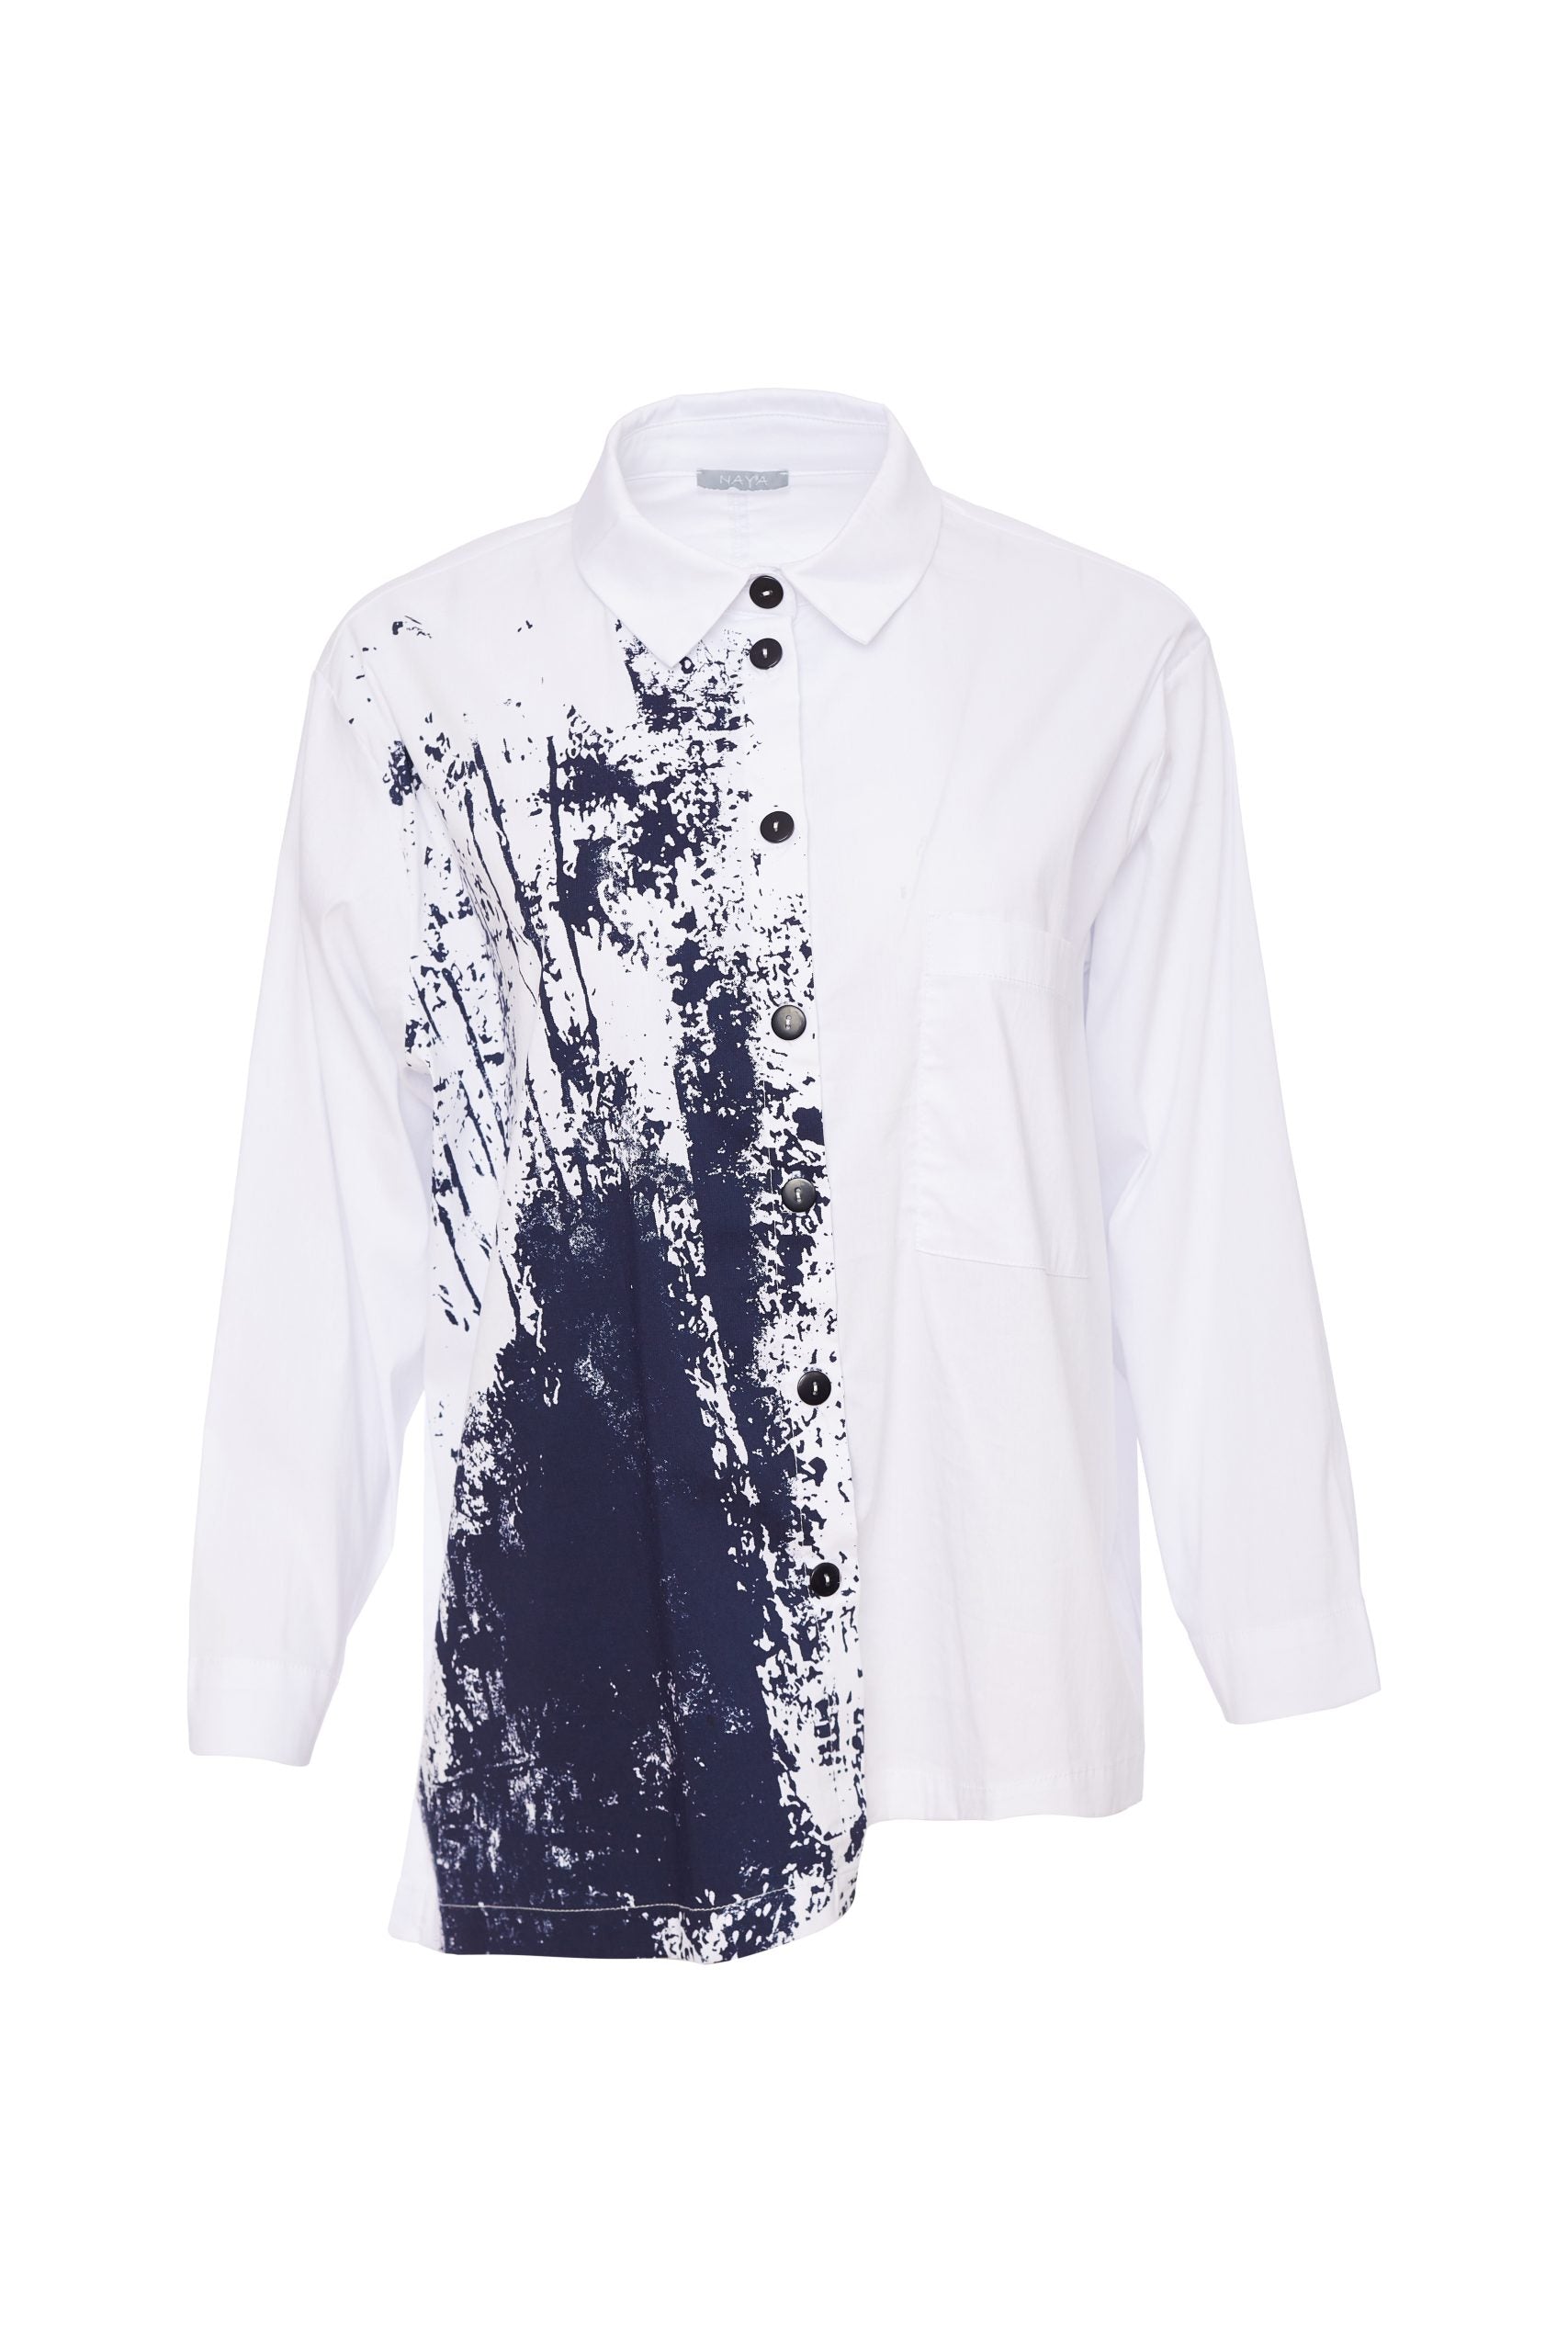 Placement Print  Shirt in White/Navy